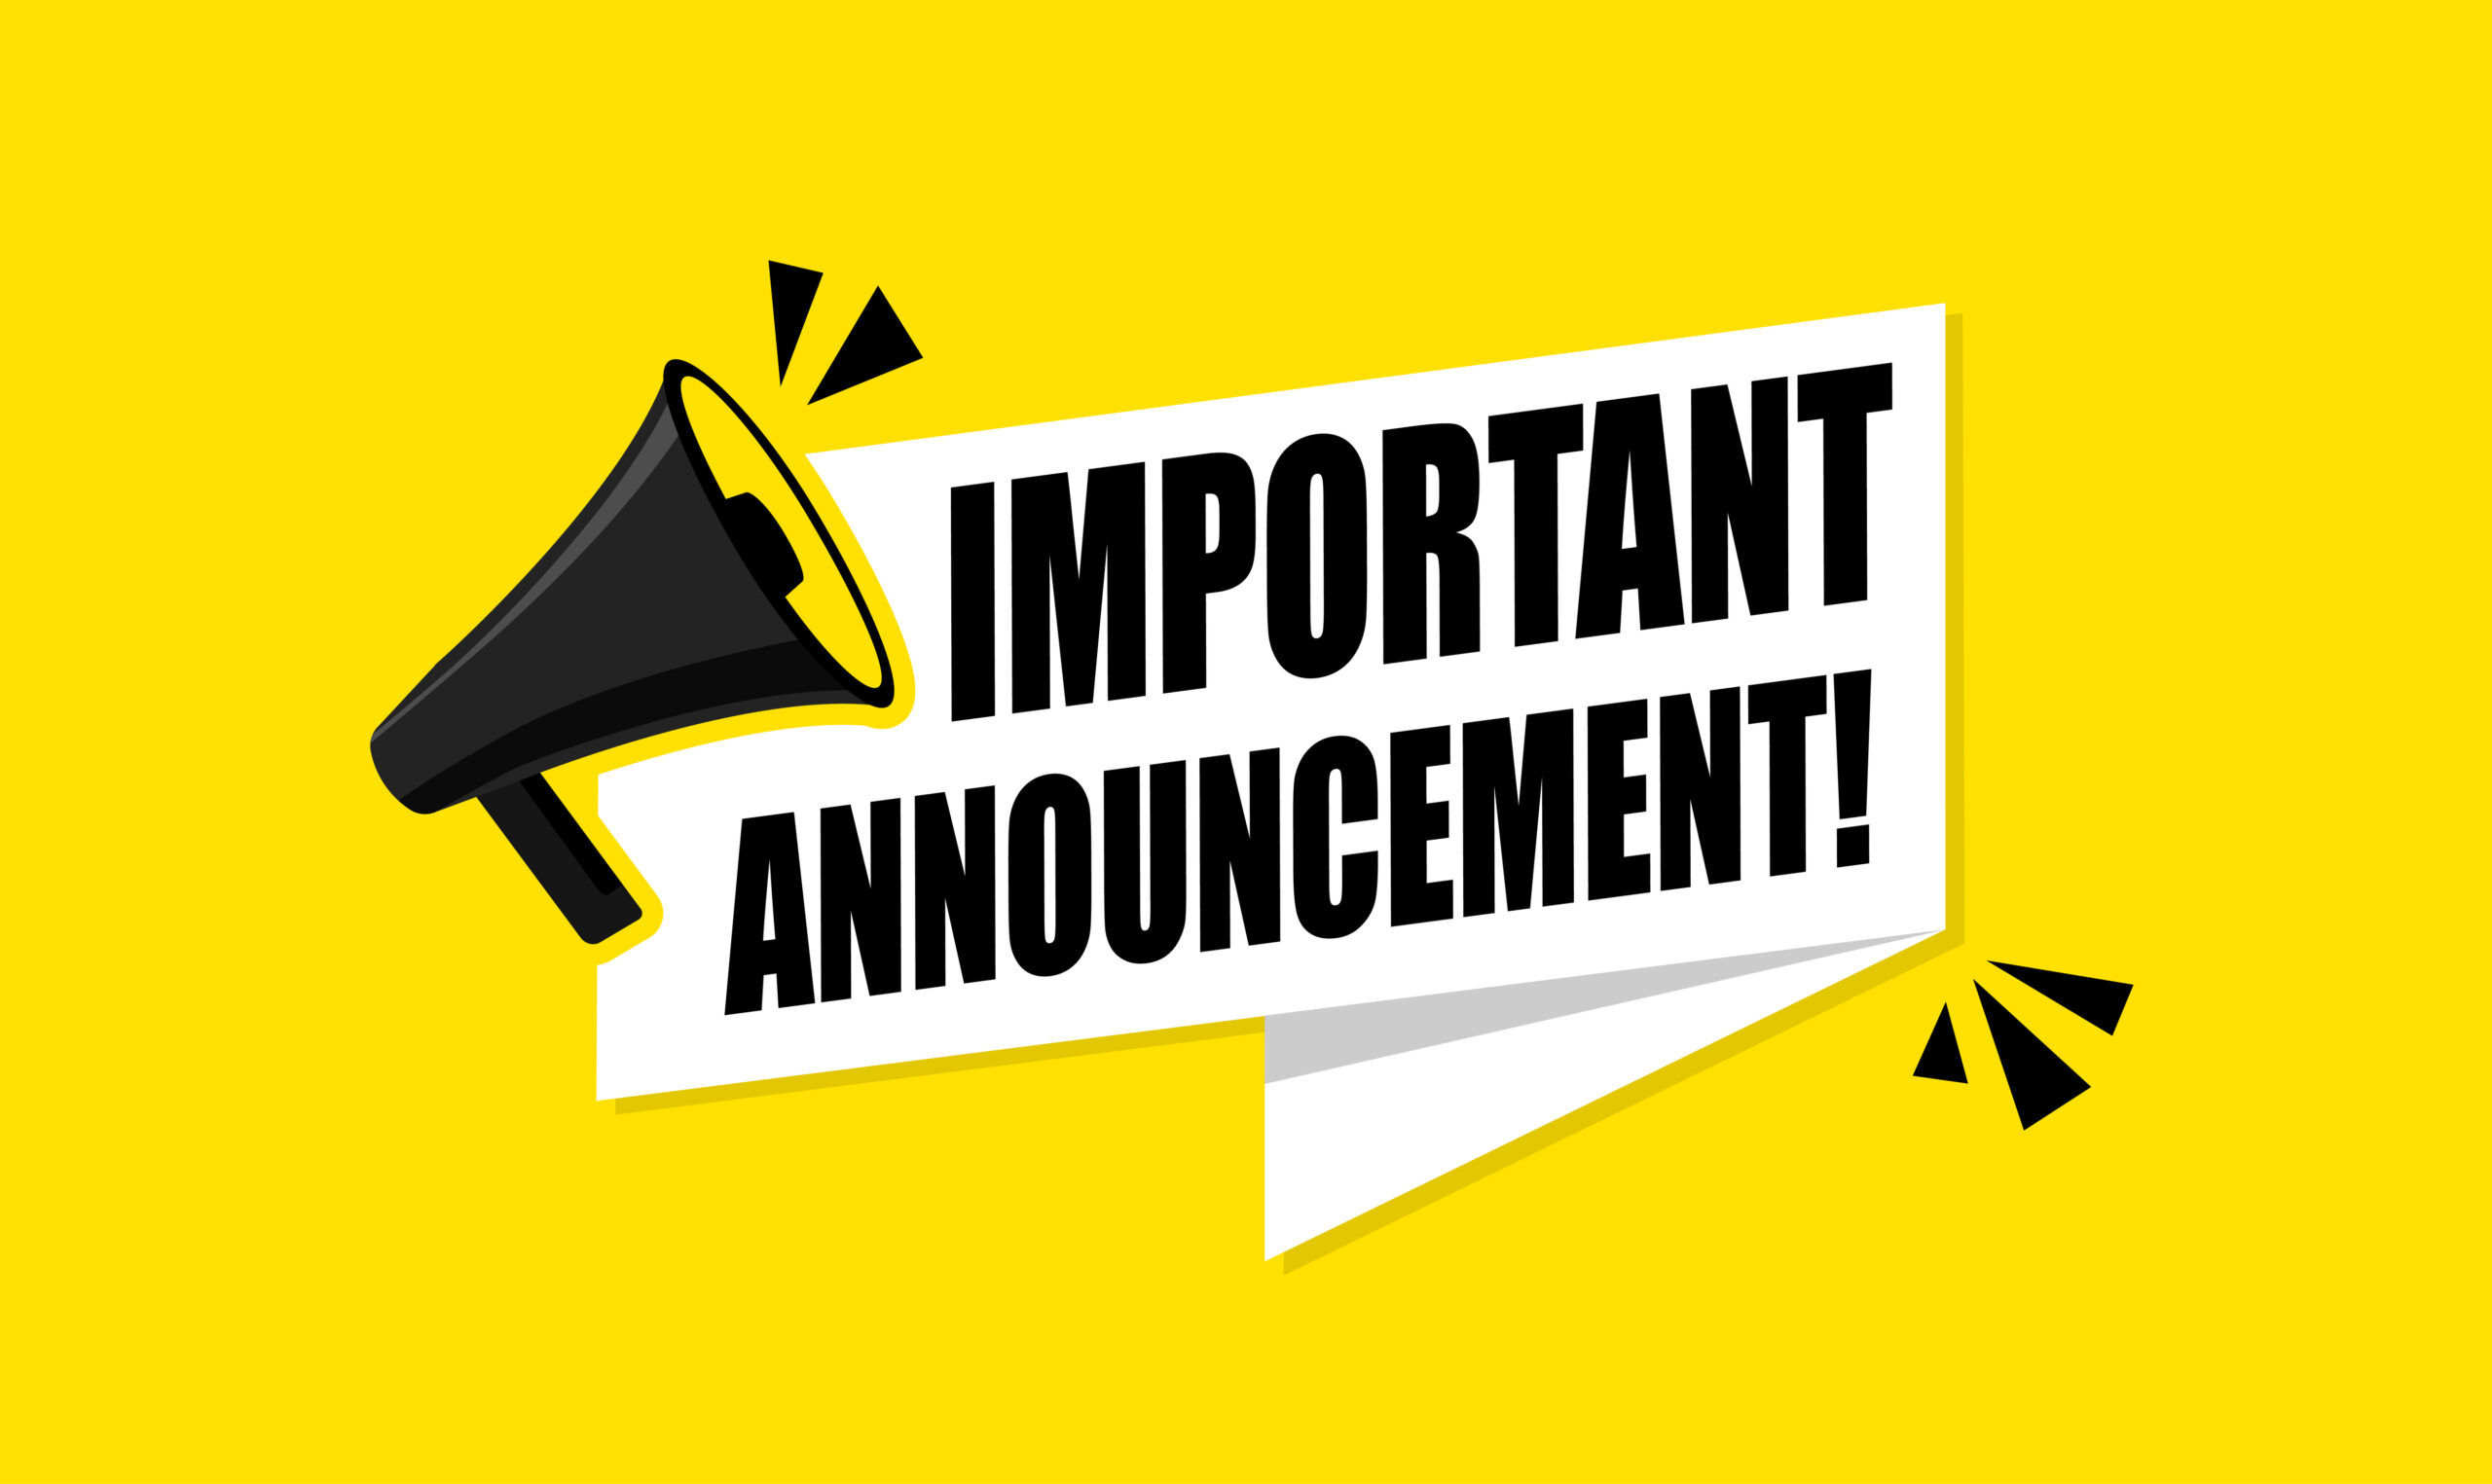 An important announcement sign with a megaphone on a yellow background.